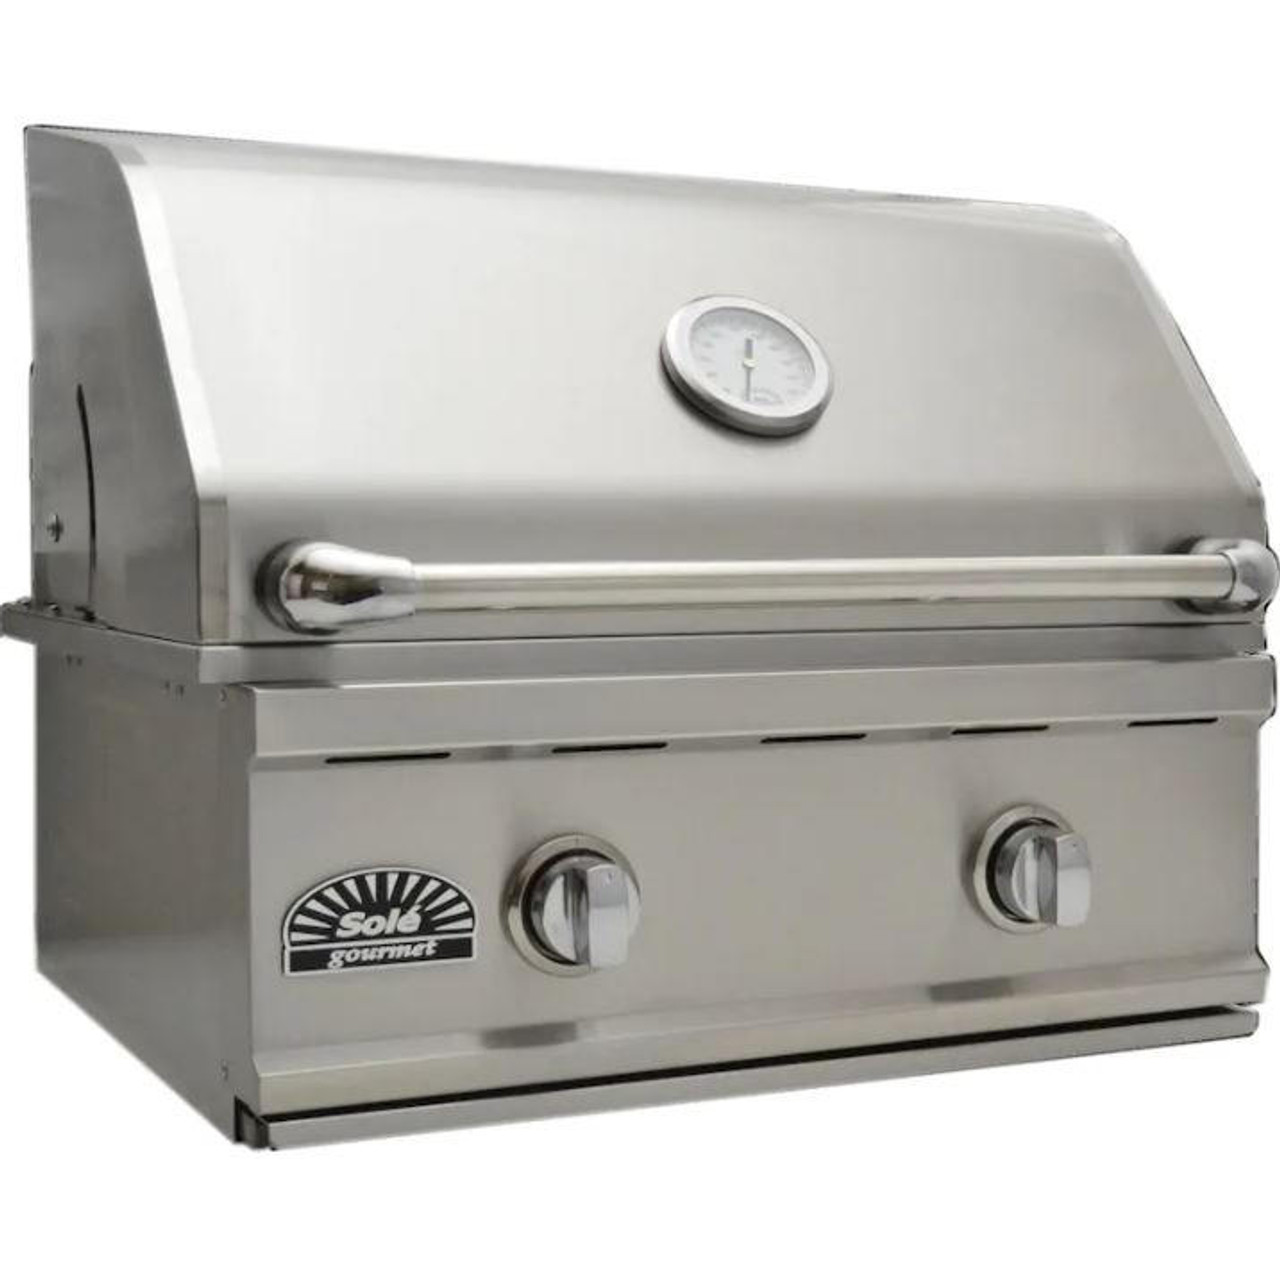 https://cdn11.bigcommerce.com/s-vpy3e9uvwe/images/stencil/1280x1280/products/3444/58989/sole-gourmet-grills-sole-luxury-tr-26-inch-built-in-propane-gas-grill__63712.1666267918.jpg?c=1